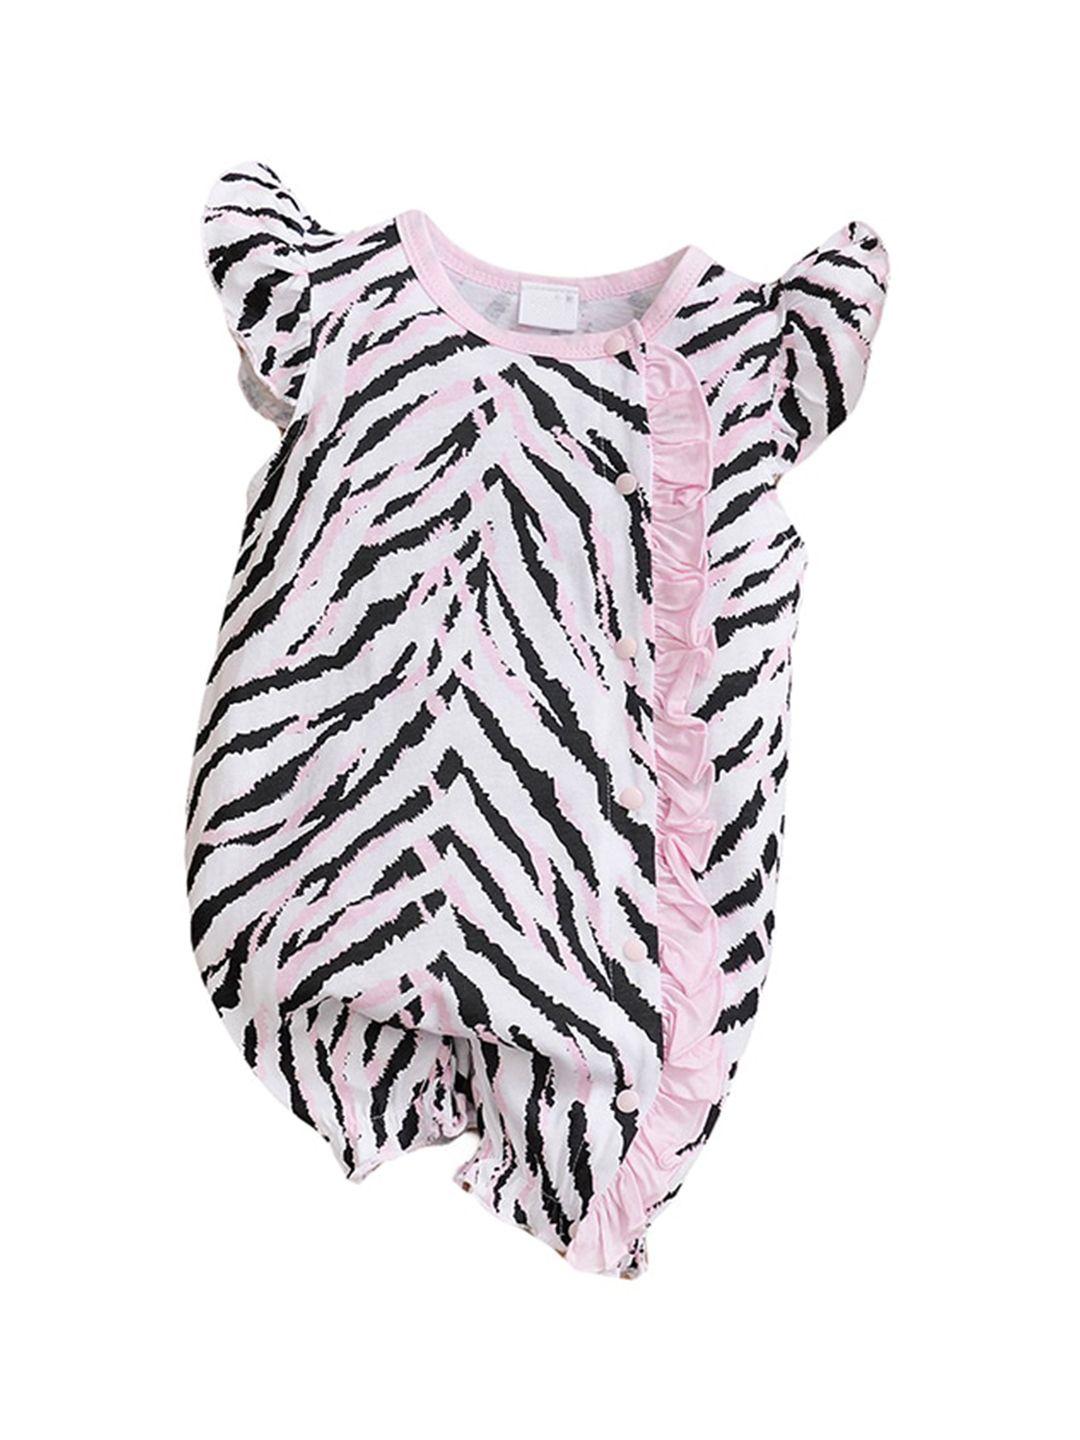 StyleCast Infant Girls Animal Skin Printed Pure Cotton Rompers